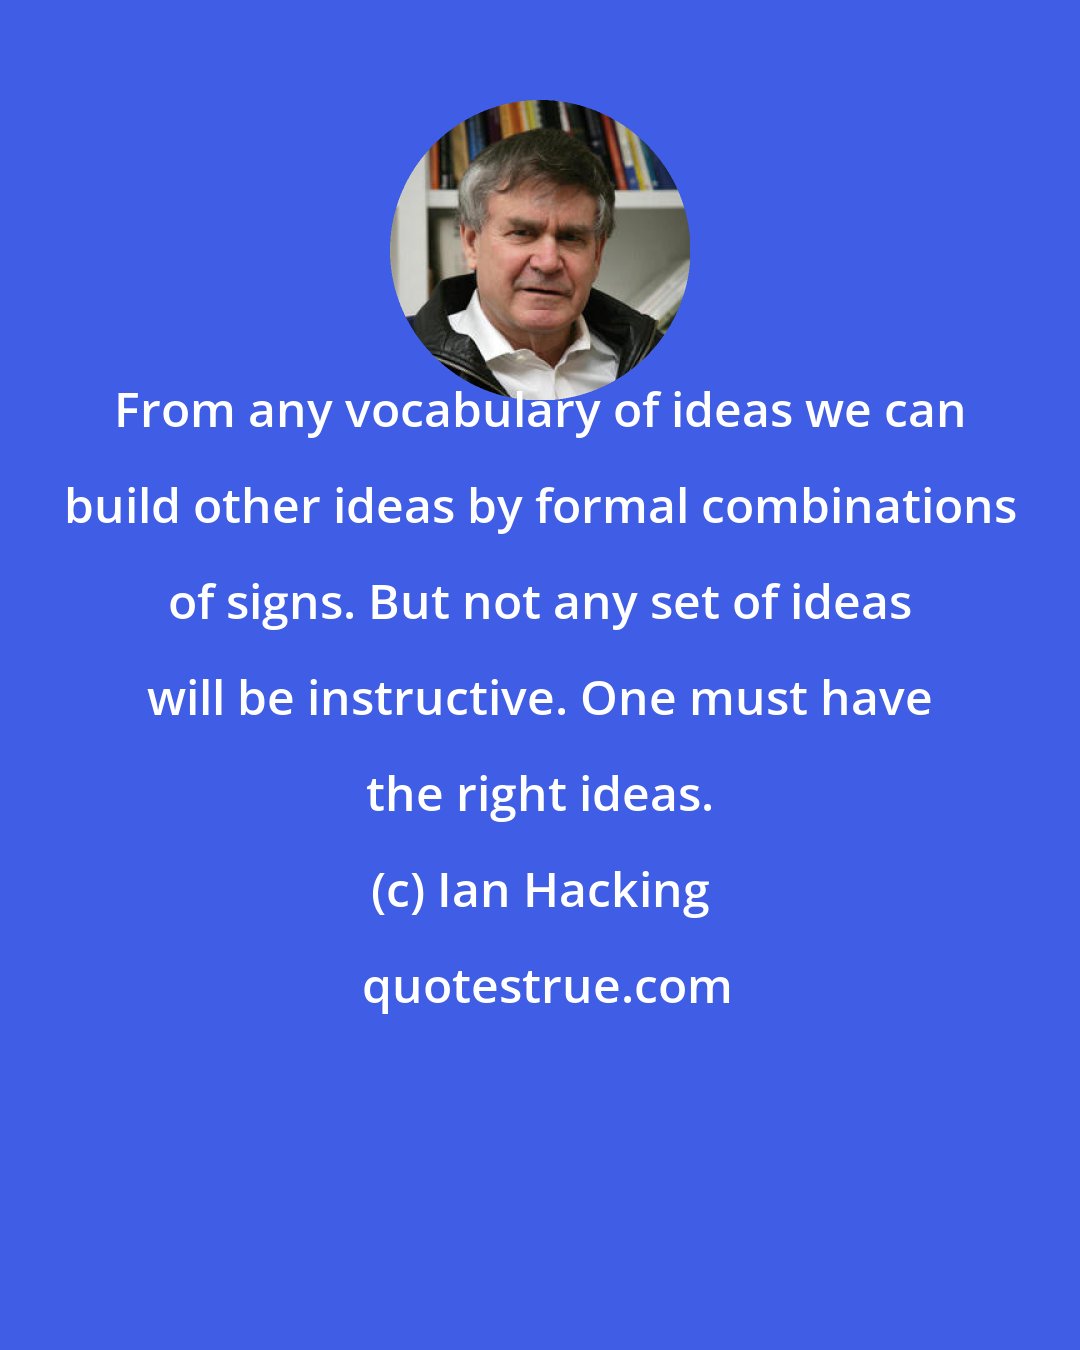 Ian Hacking: From any vocabulary of ideas we can build other ideas by formal combinations of signs. But not any set of ideas will be instructive. One must have the right ideas.